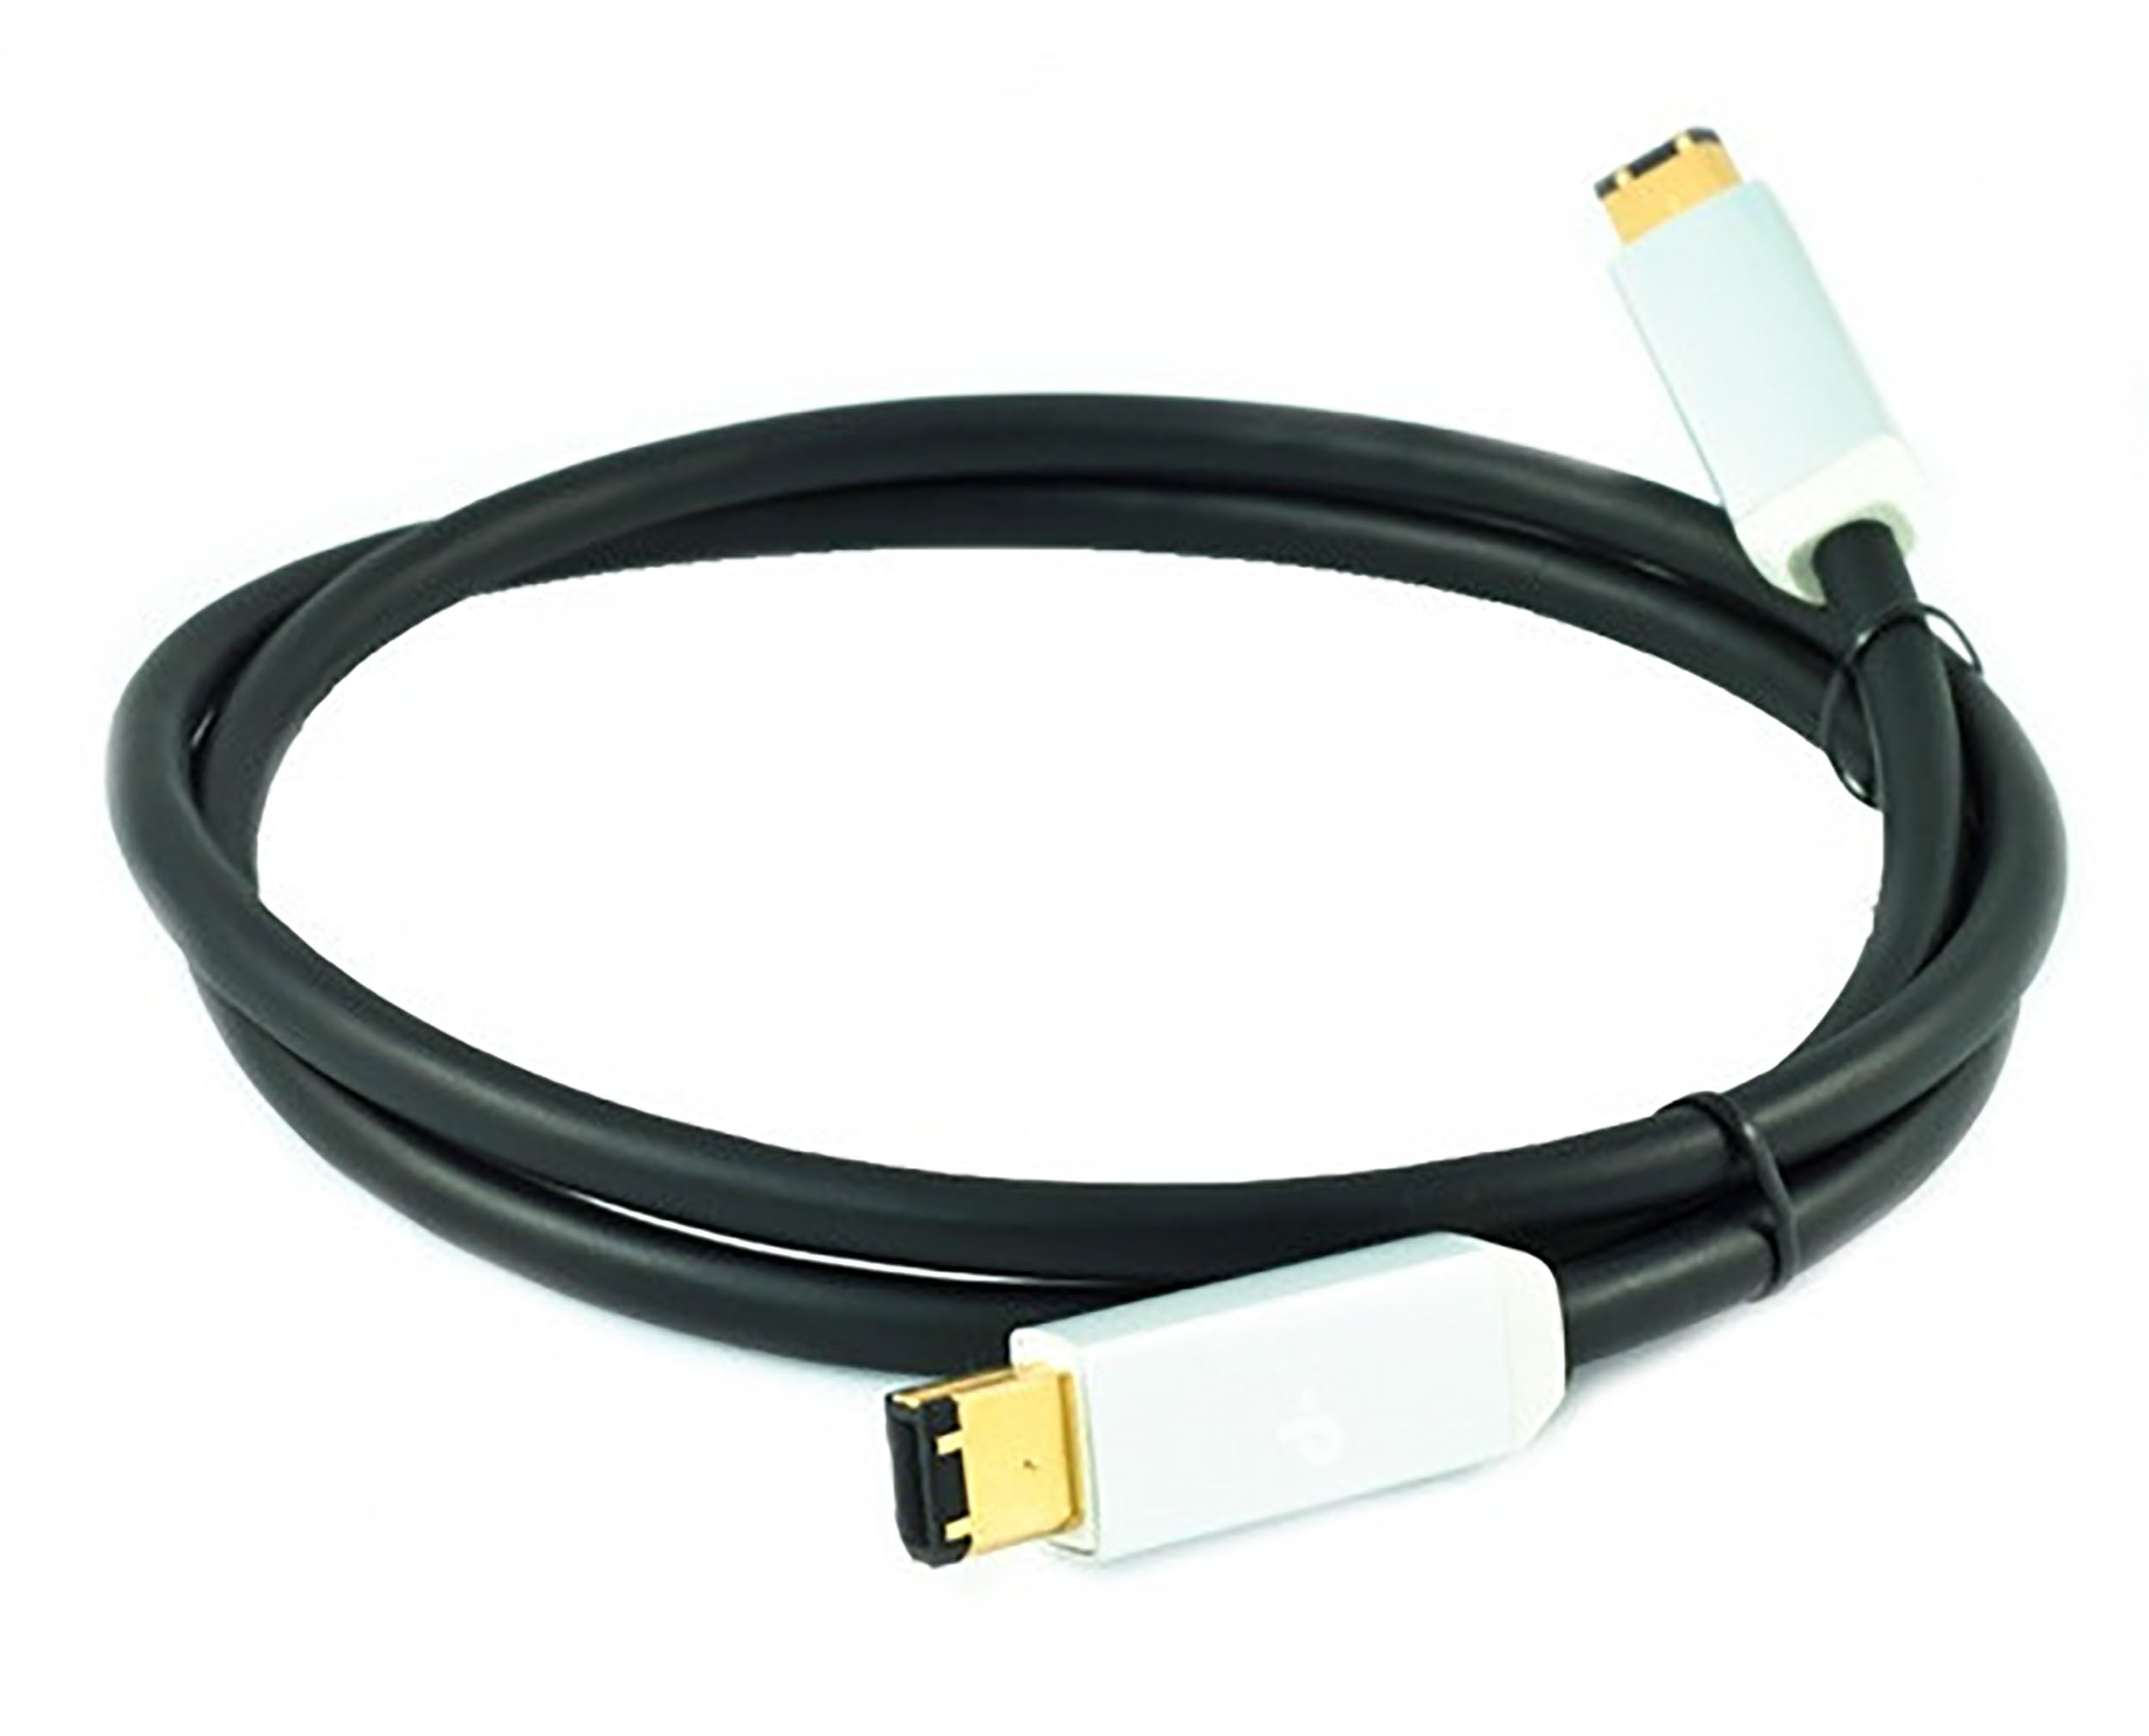 Oyaide Neo D+ Series Firewire Cable 6pin to 6pin - 1 Meter by Oyaide